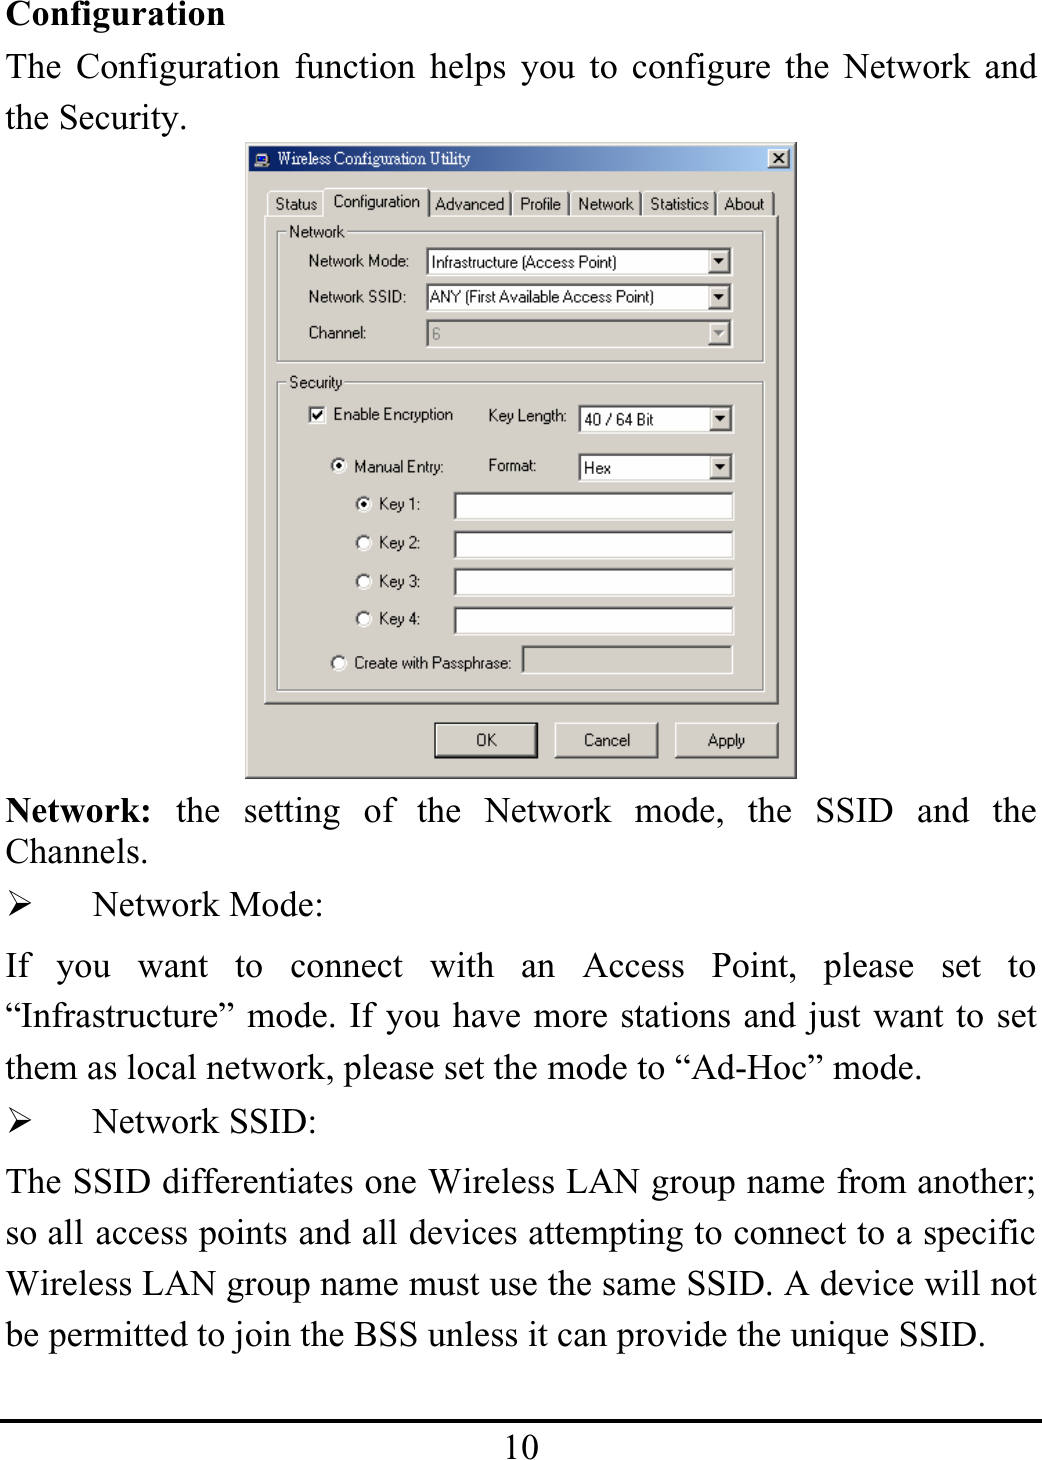 10ConfigurationThe Configuration function helps you to configure the Network andthe Security.Network: the setting of the Network mode, the SSID and theChannels.¾Network Mode:If you want to connect with an Access Point, please set to“Infrastructure” mode. If you have more stations and just want to setthem as local network, please set the mode to “Ad-Hoc” mode.¾Network SSID:The SSID differentiates one Wireless LAN group name from another; so all access points and all devices attempting to connect to a specific Wireless LAN group name must use the same SSID. A device will not be permitted to join the BSS unless it can provide the unique SSID.